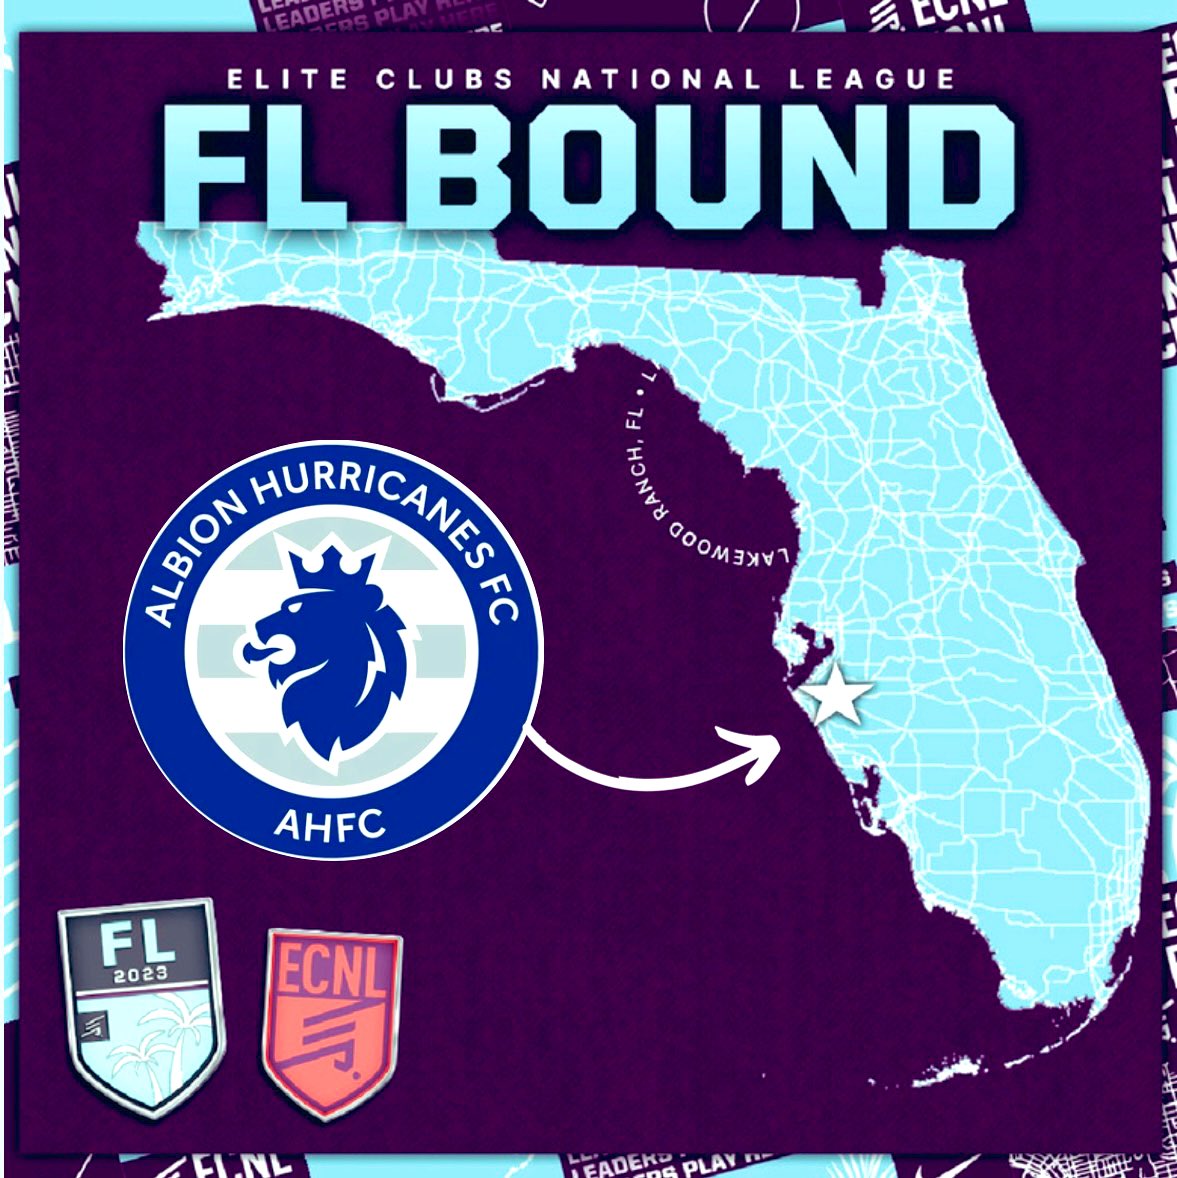 Let’s GO! 💪 Travel day for our team to #ECNLFL. Our first game is tomorrow at 9:50 🆚 FSA FC on Field #15. Hope to 👀 you there! 💙 #ahfcsoccer #ahfcfamily #ahfcpride